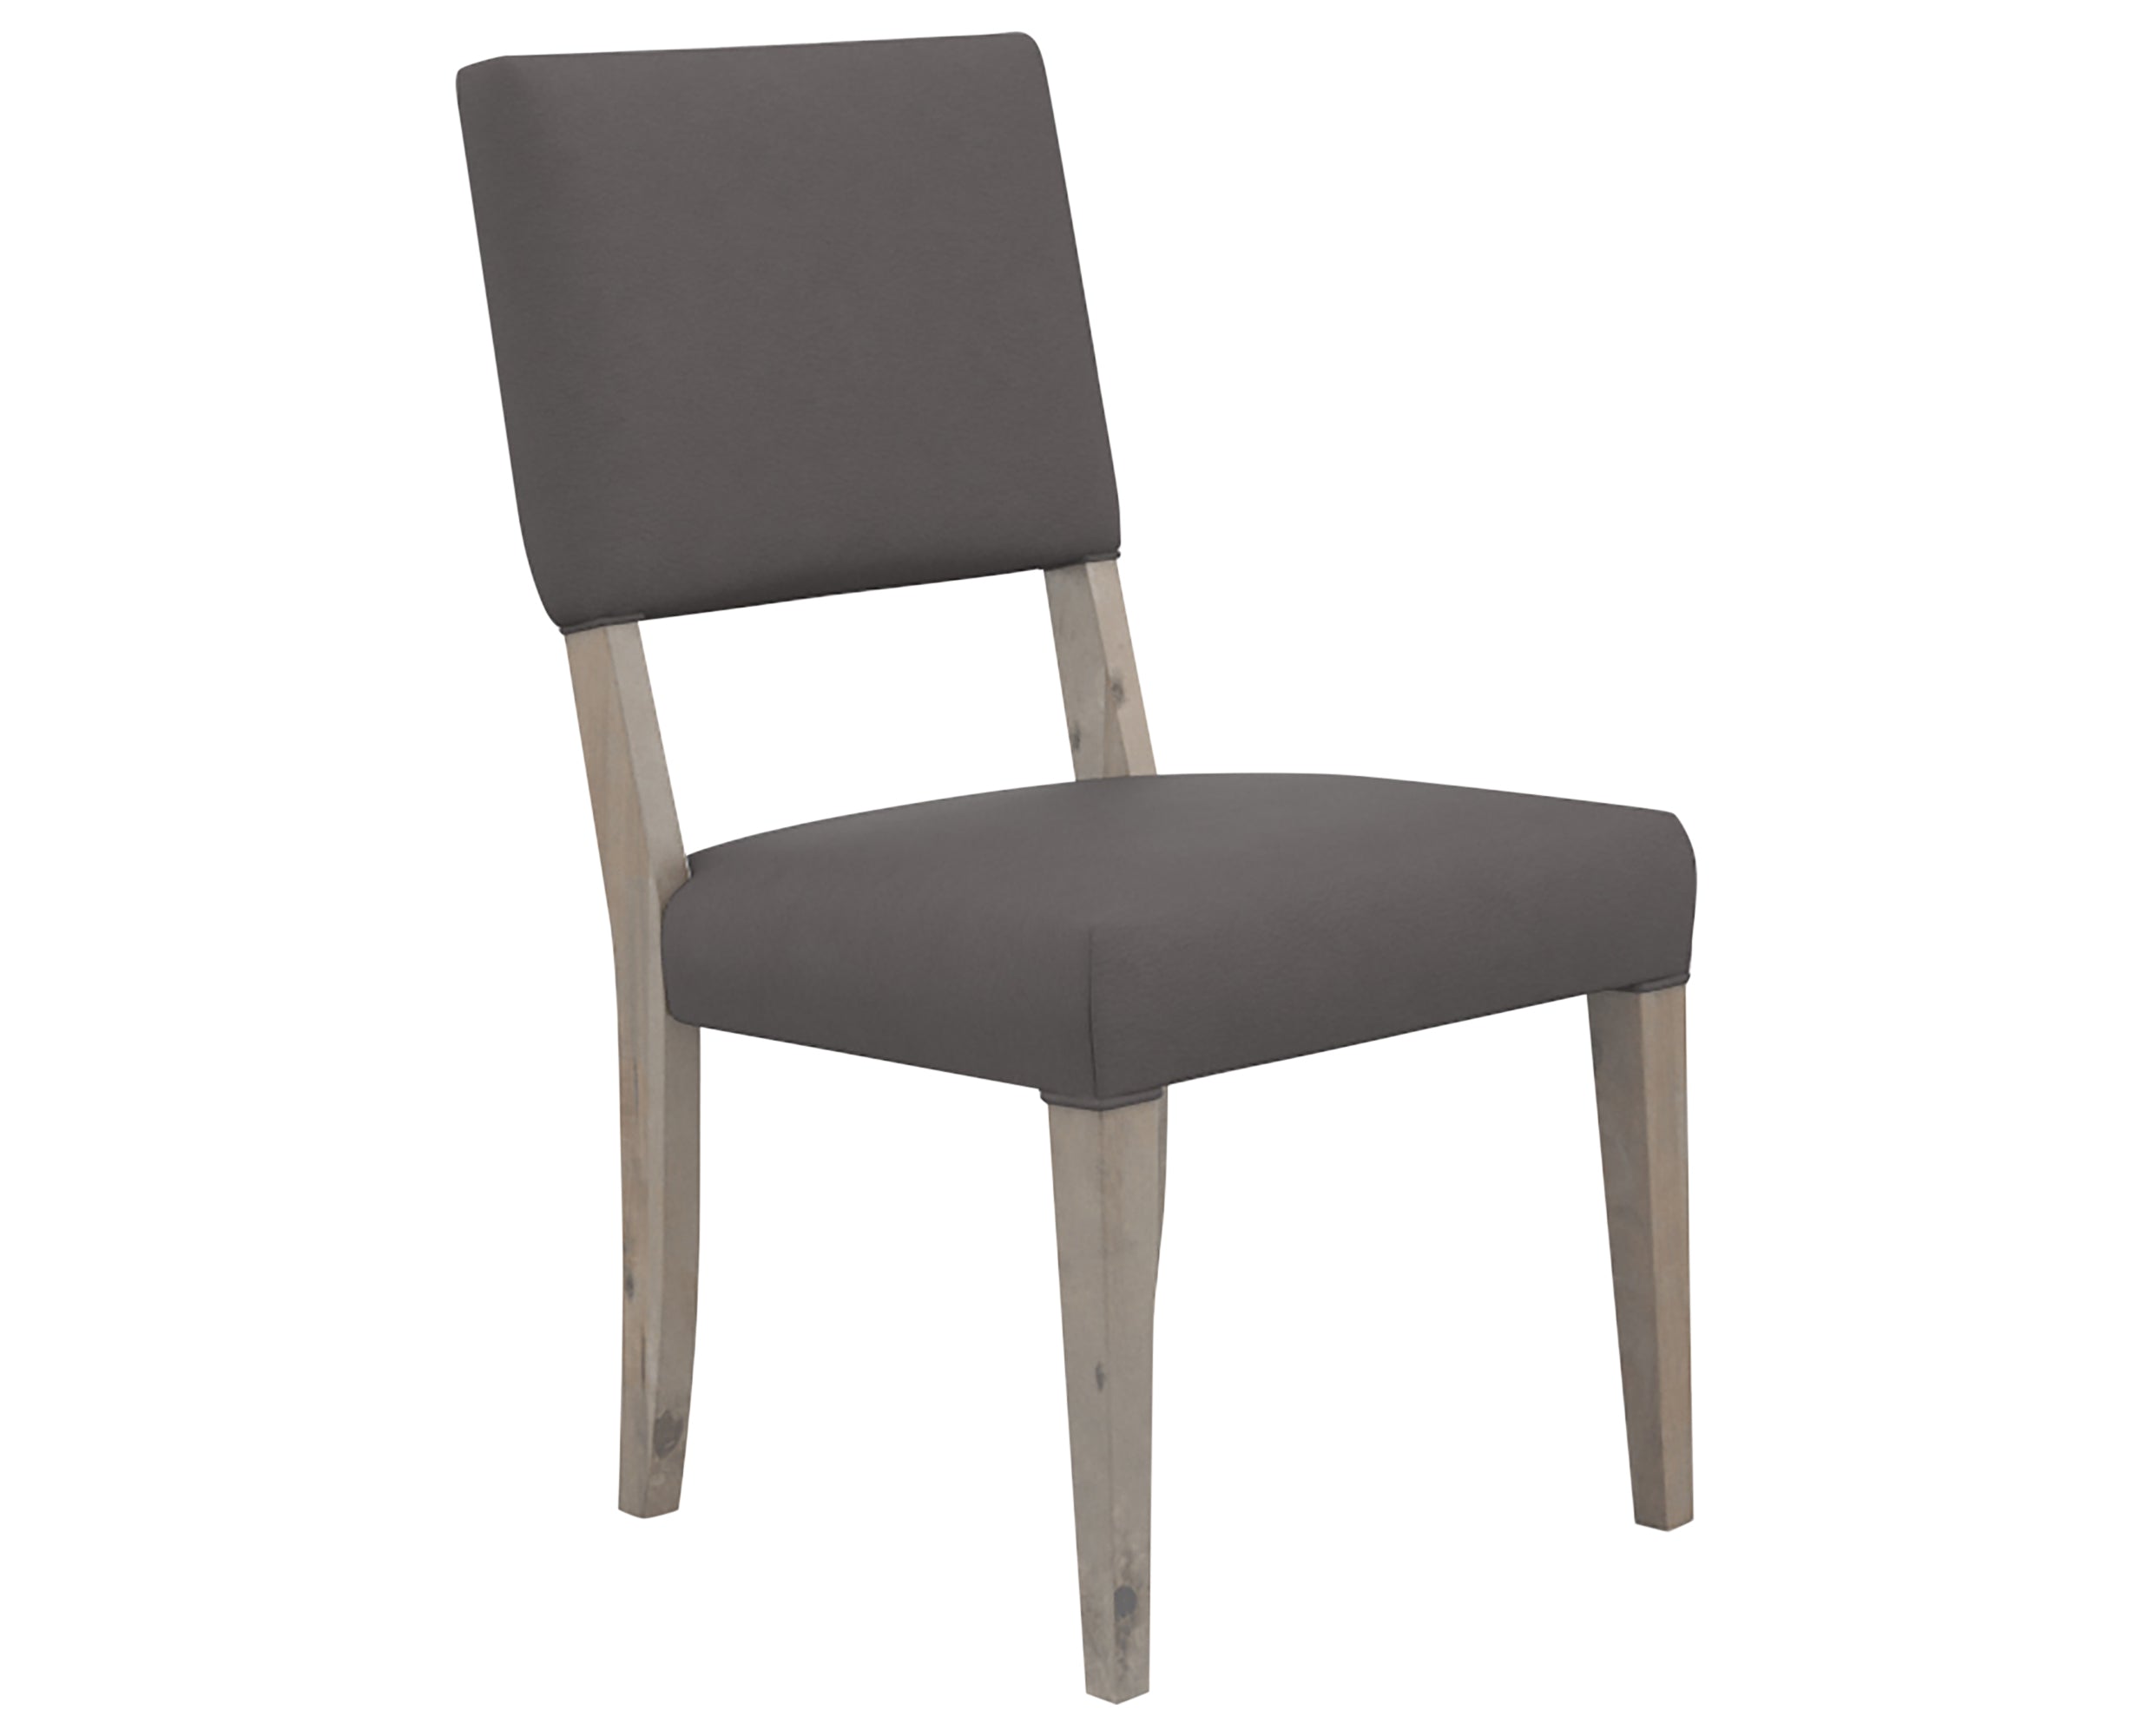 Shadow & Faux Leather XU | Canadel Loft Dining Chair 5051 | Valley Ridge Furniture